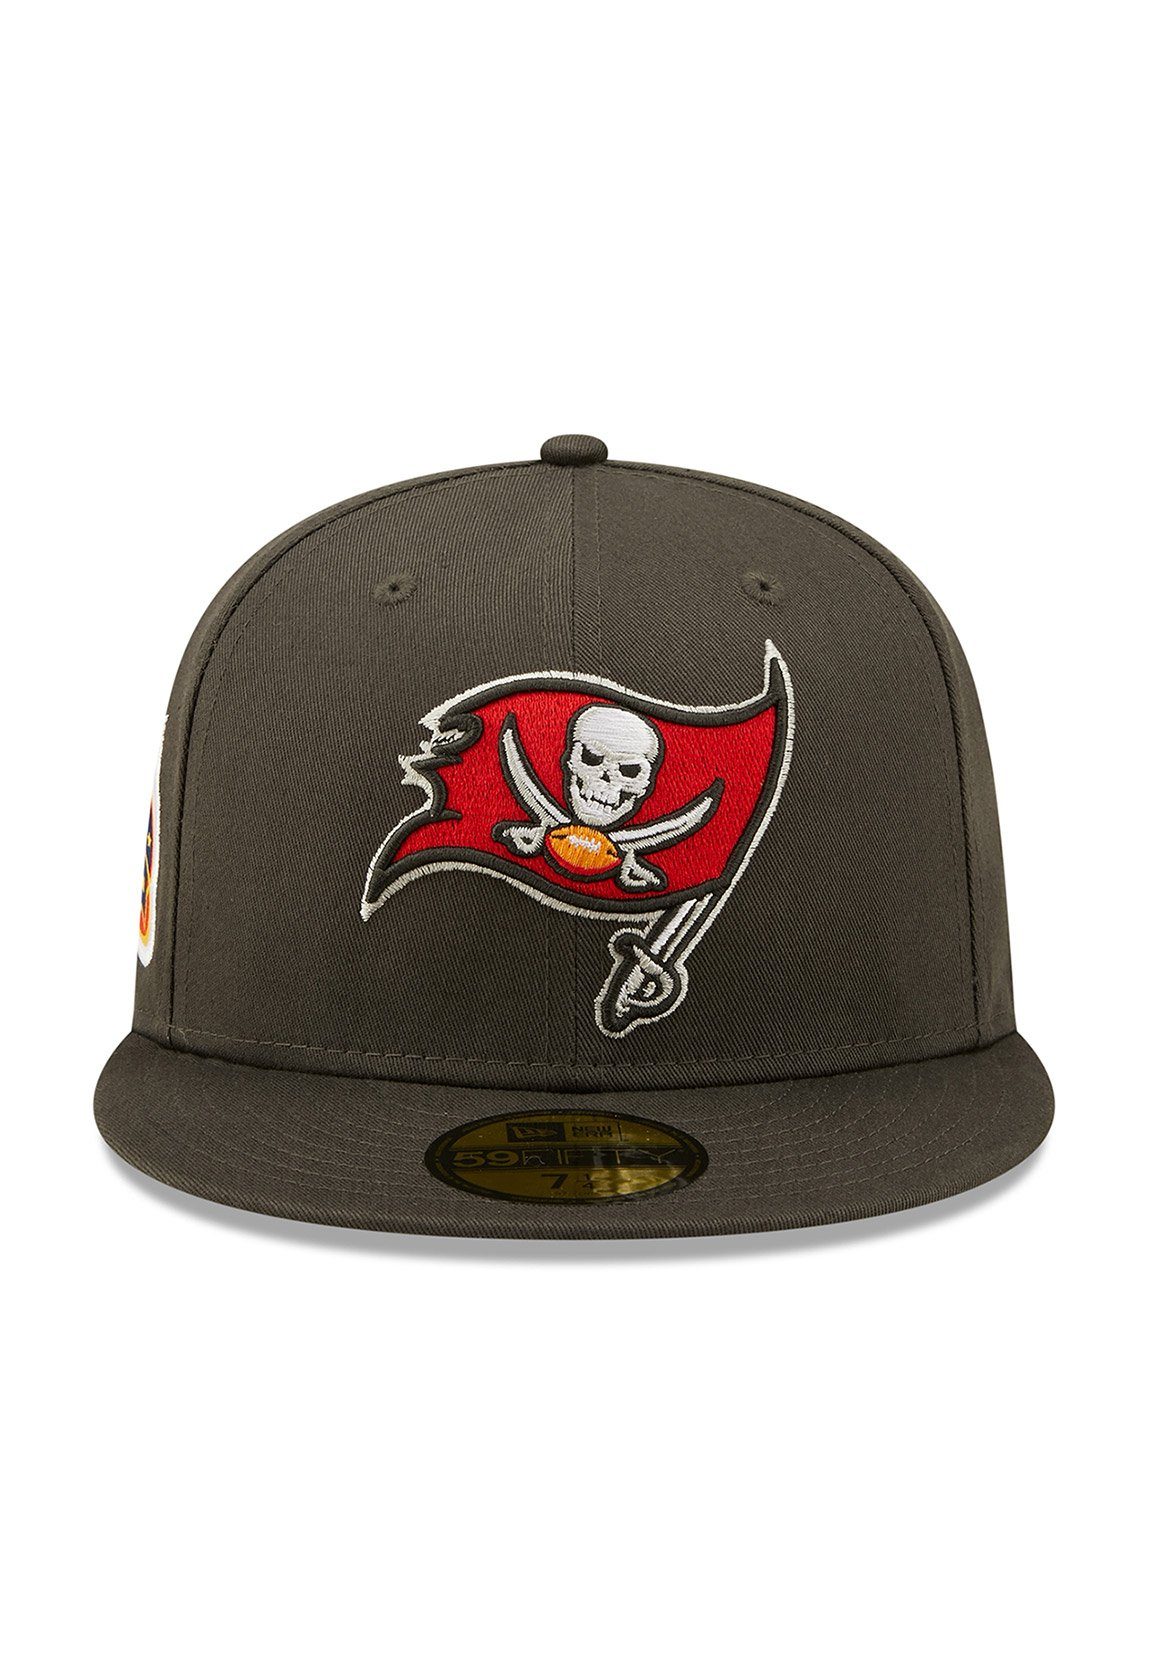 BUCCANEERS Era TAMPA BAY Charcoal New Cap Fitted Patch 59Fifty New Side Grau